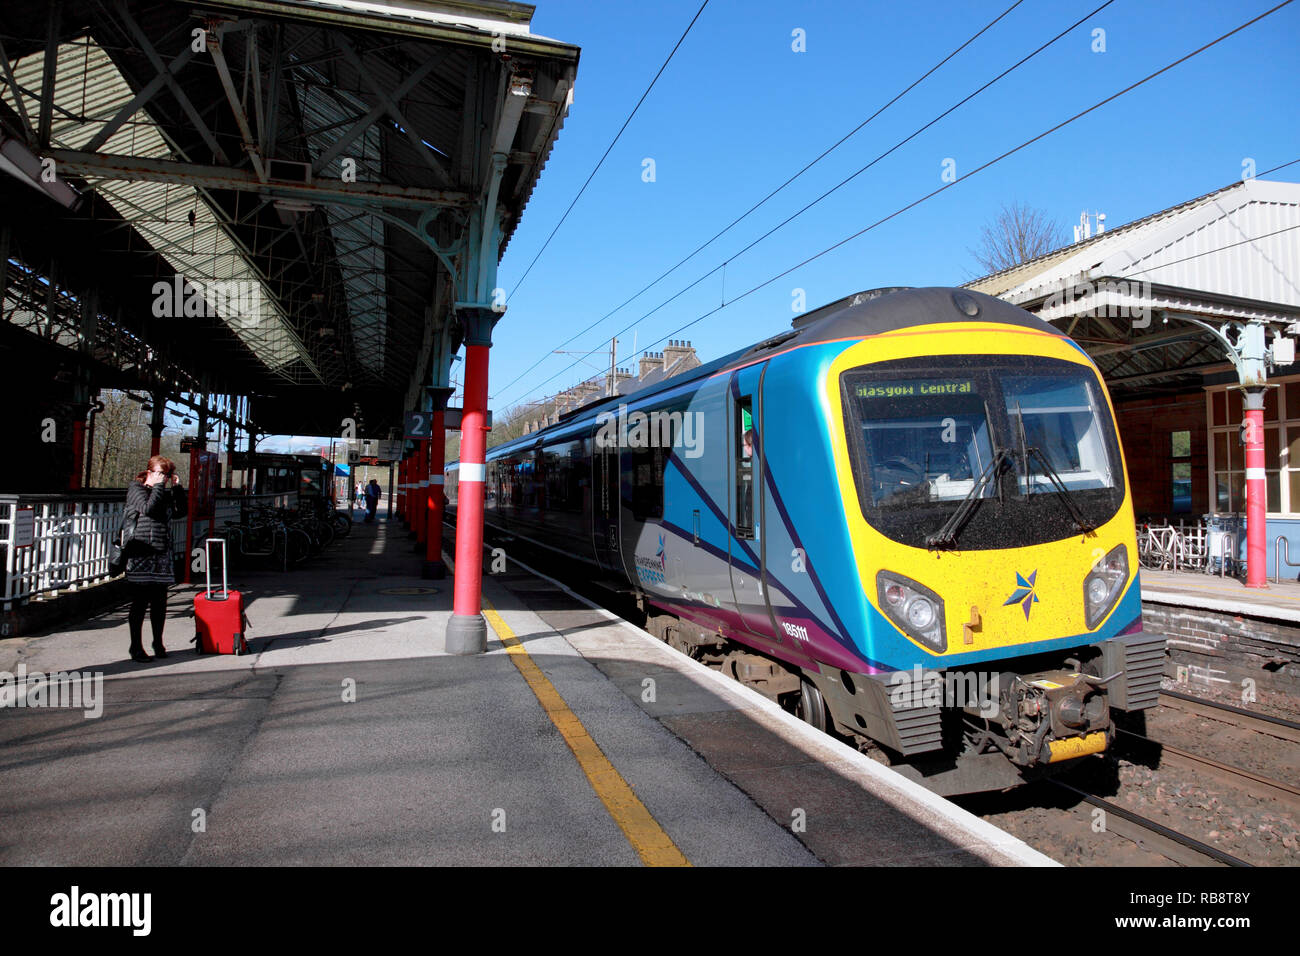 A TransPennine Express train at Platform 2 at Oxenholme station in the Lake District, Cumbria, northern England Stock Photo